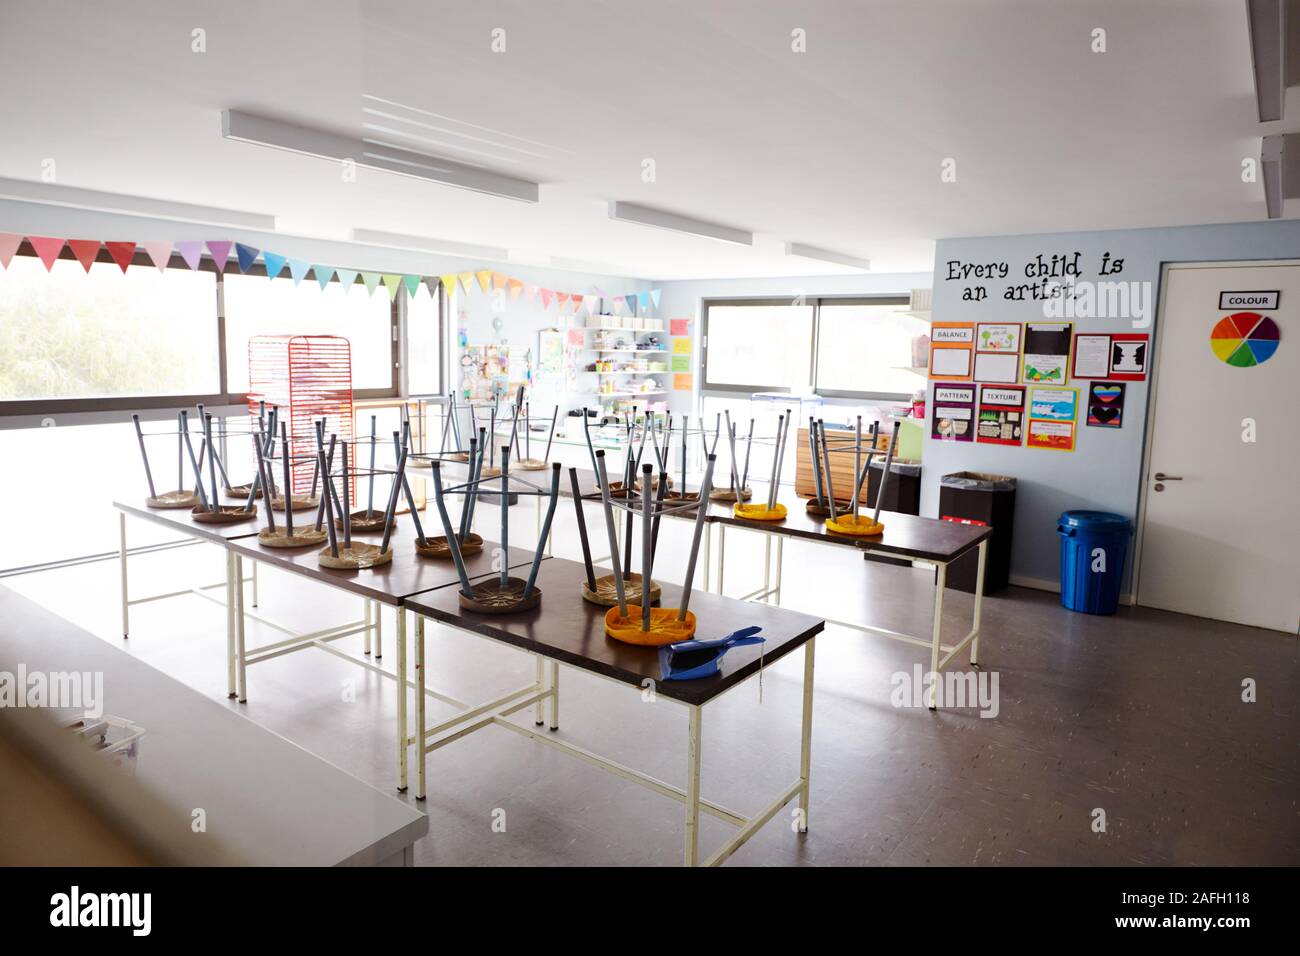 Empty Art Classroom In Elementary School With Chairs Stacked On Tables Stock Photo